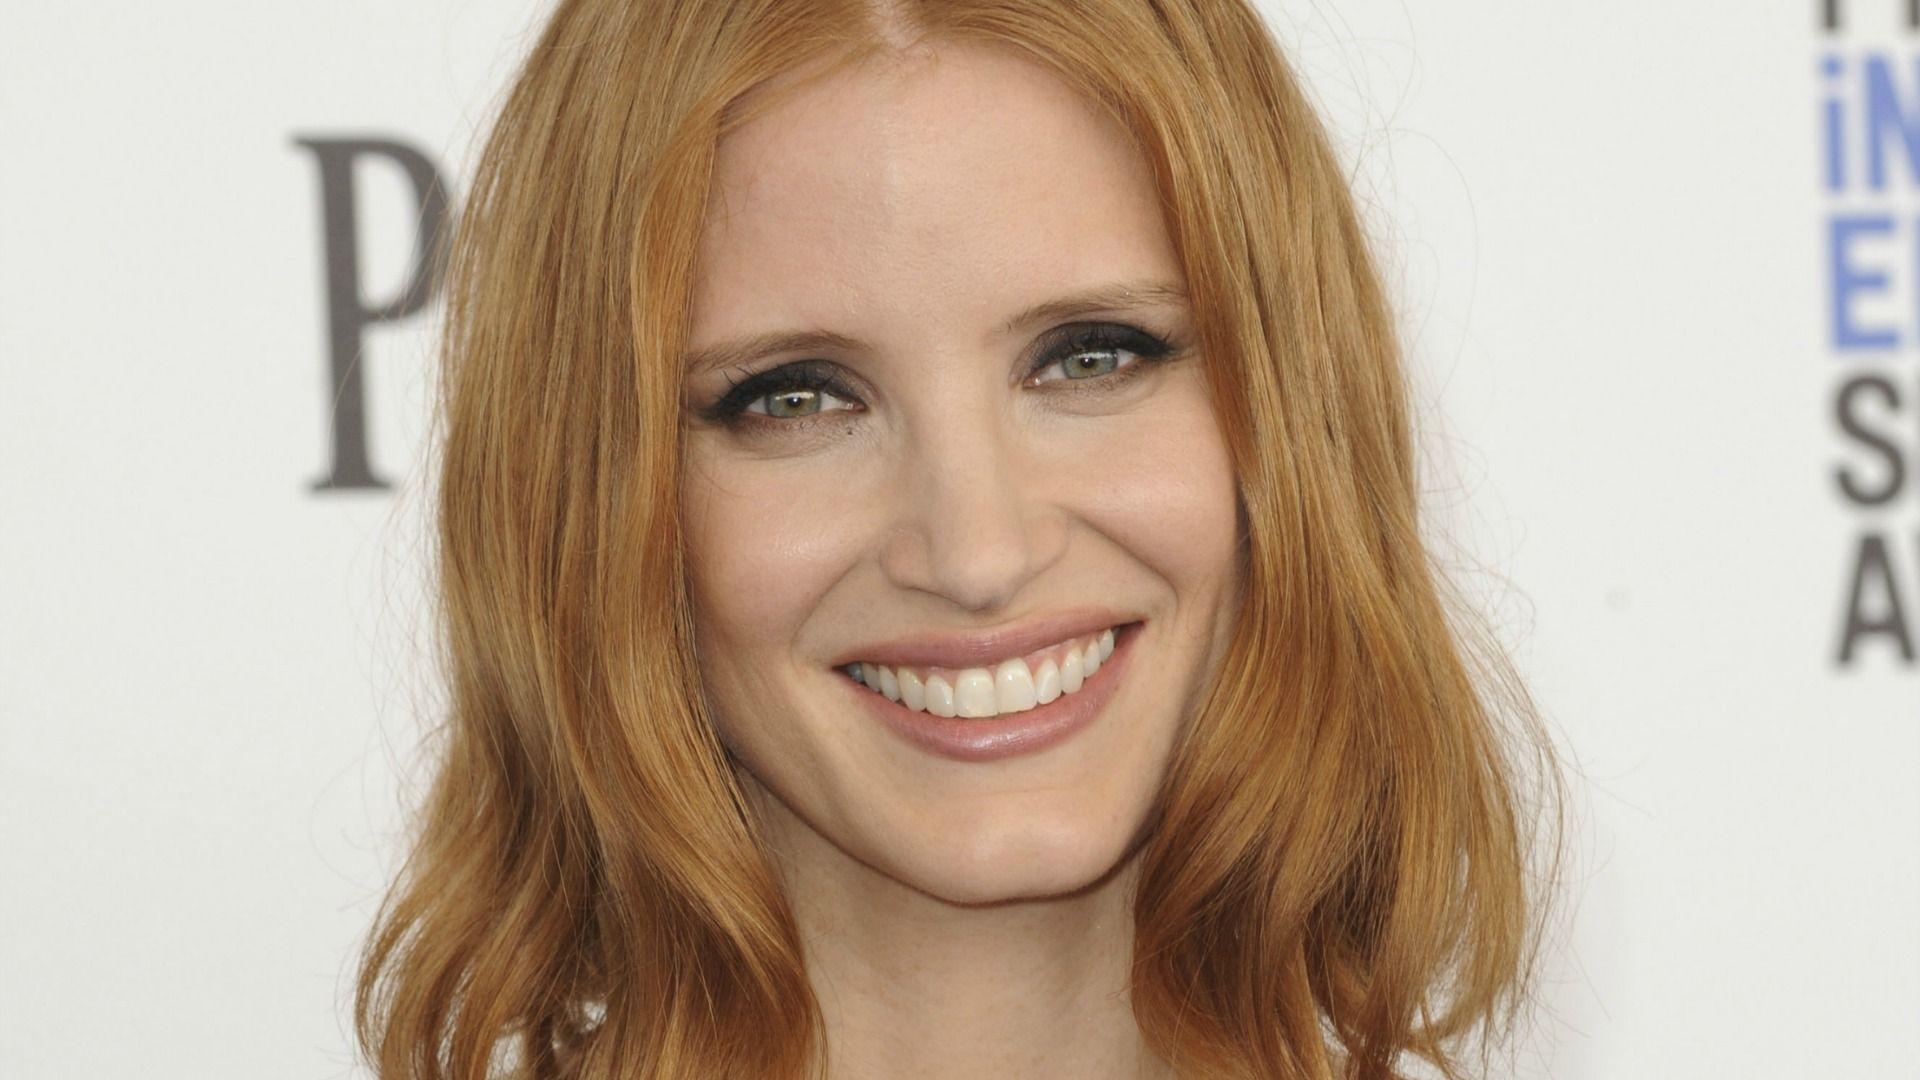 Why Jessica Chastain's avoiding relationships with Hollywood bachelors...